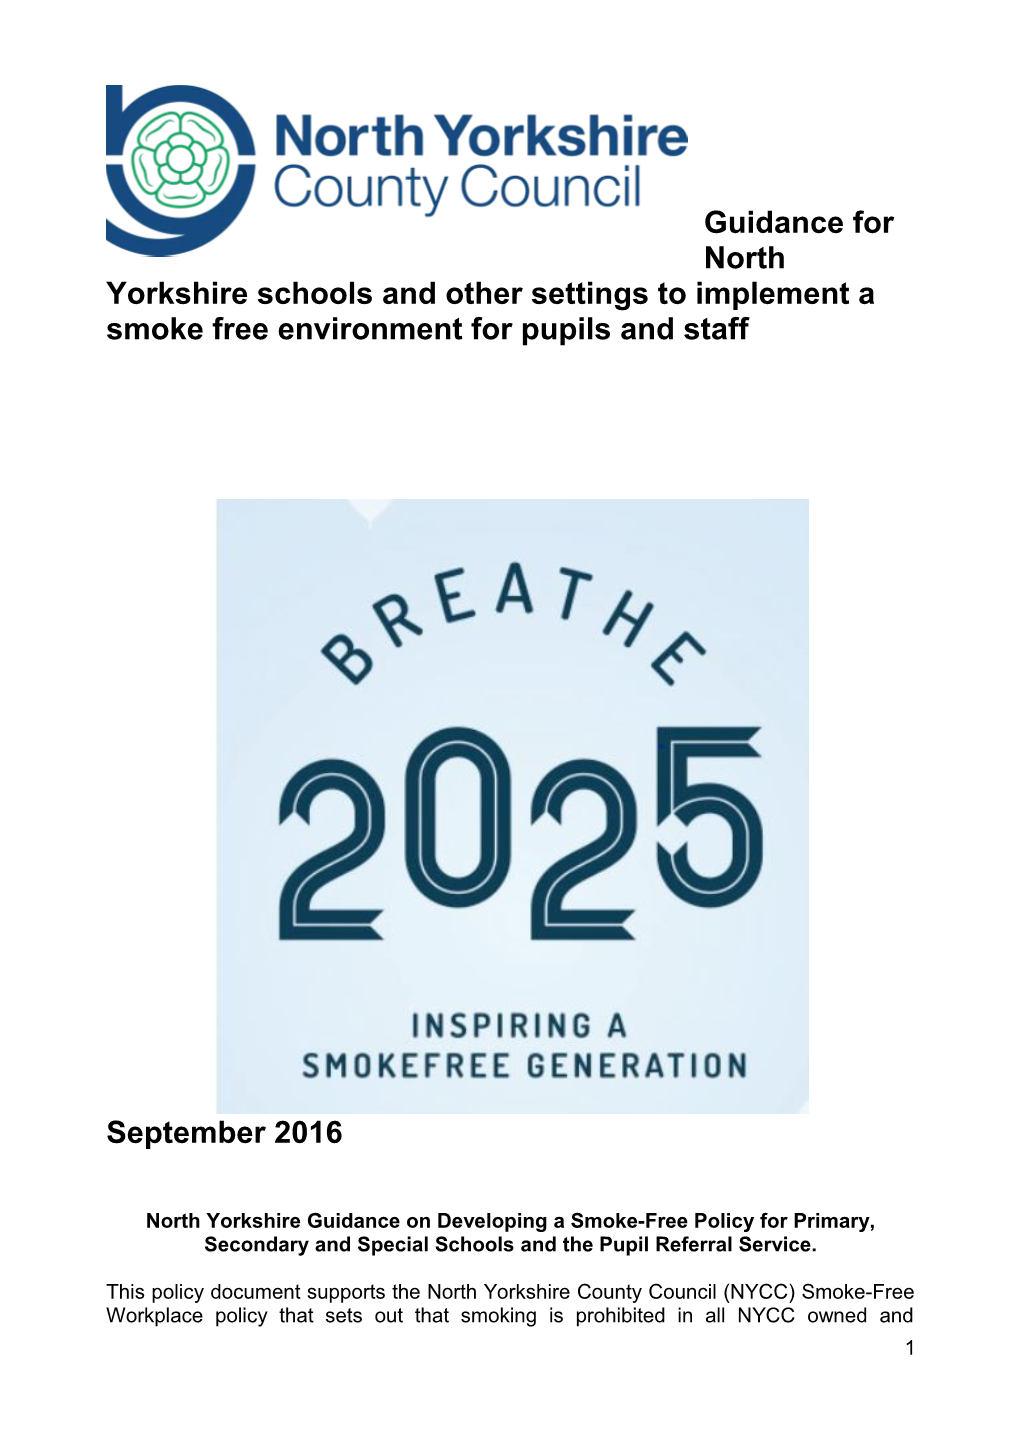 Guidance for North Yorkshire Schools and Other Settings to Implement a Smoke Free Environment